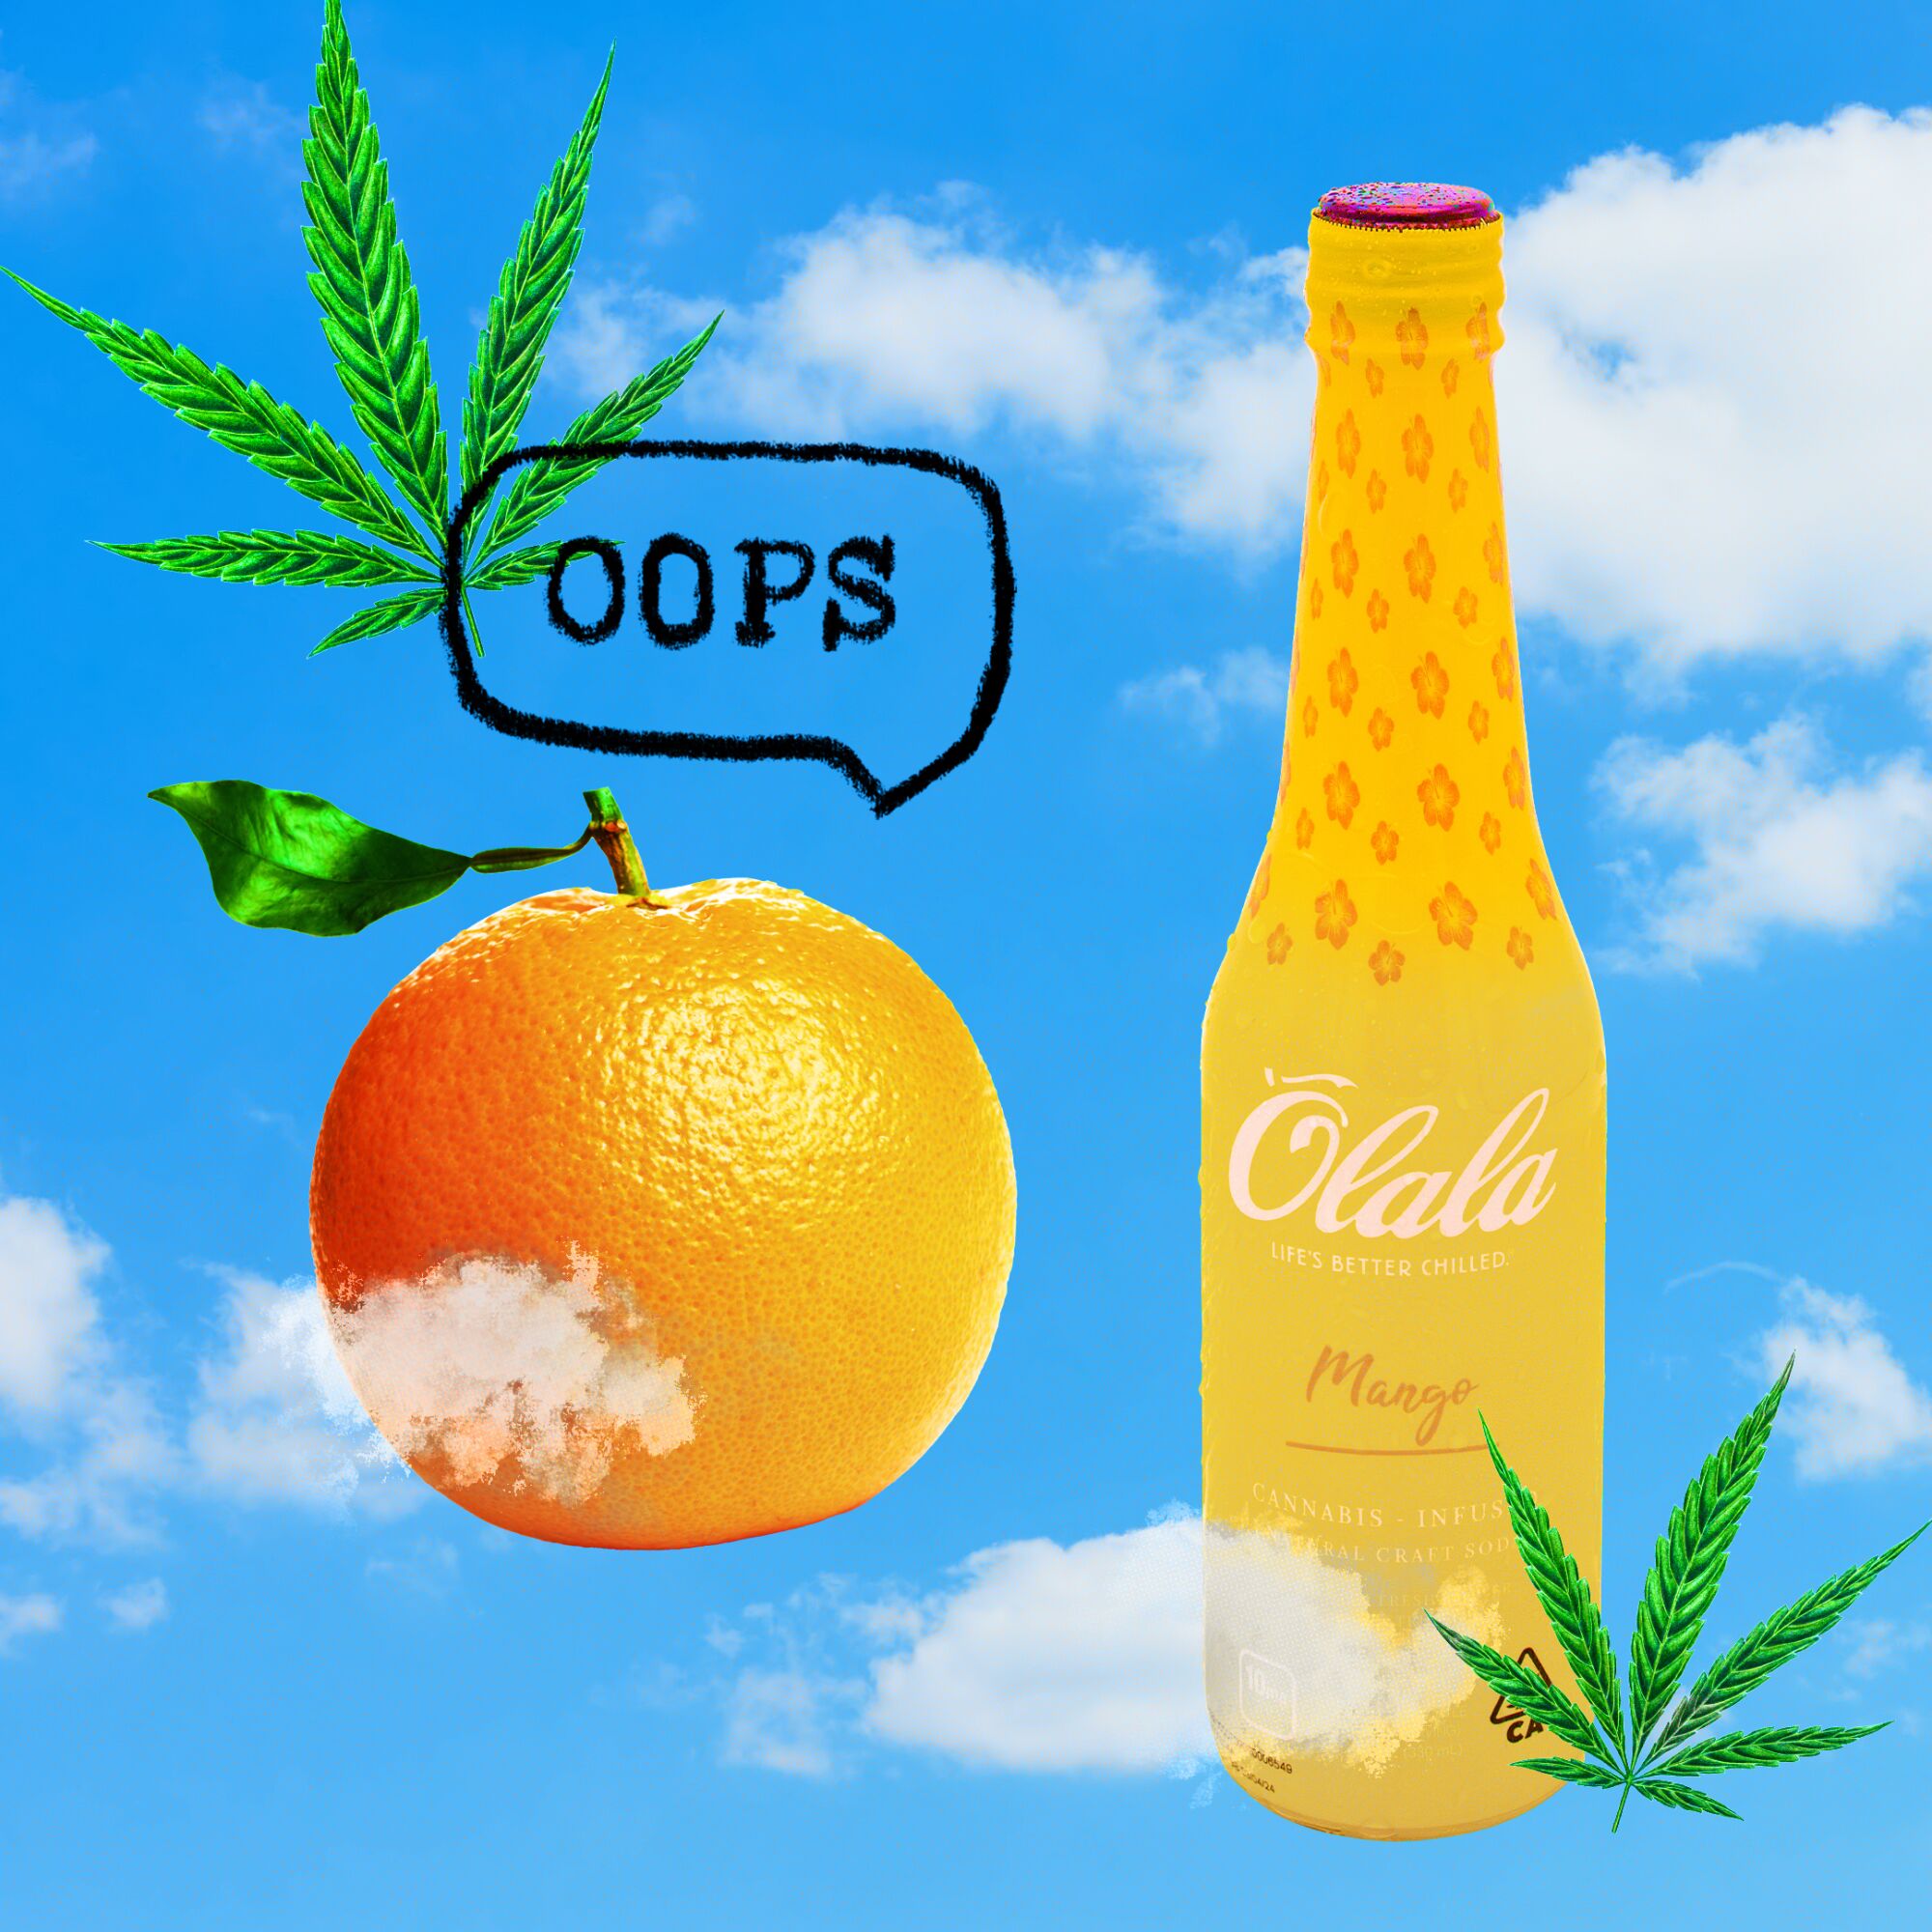 Olala Mango drink next to an illustrated orange and the word "oops."